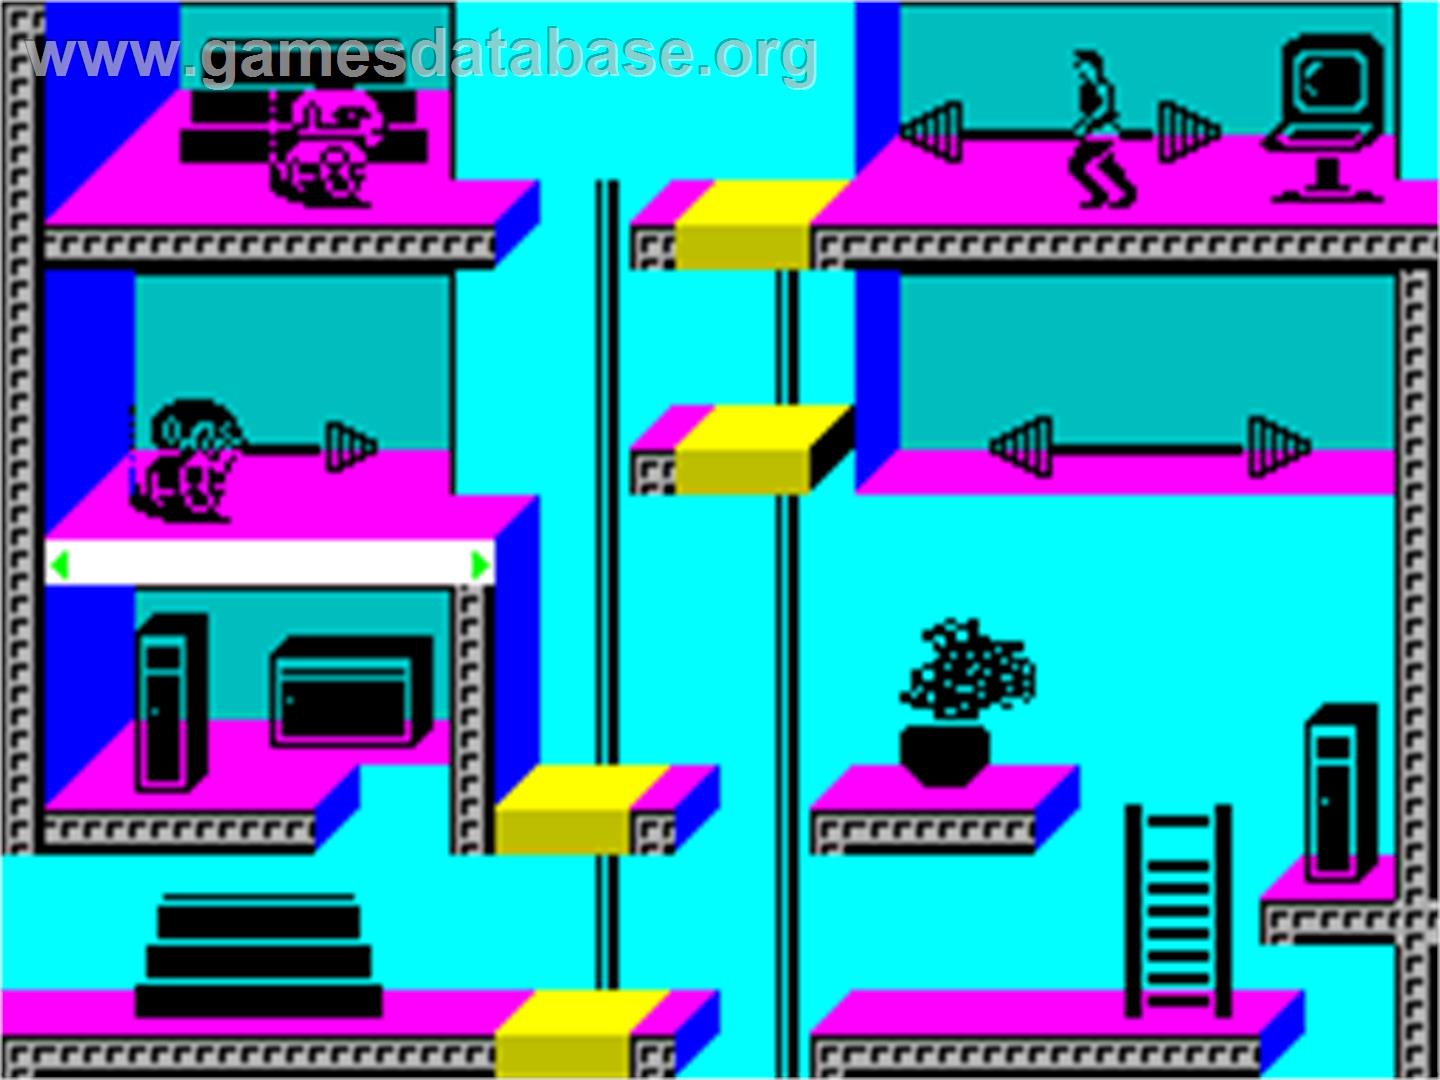 Impossible Mission II - Sinclair ZX Spectrum - Artwork - In Game